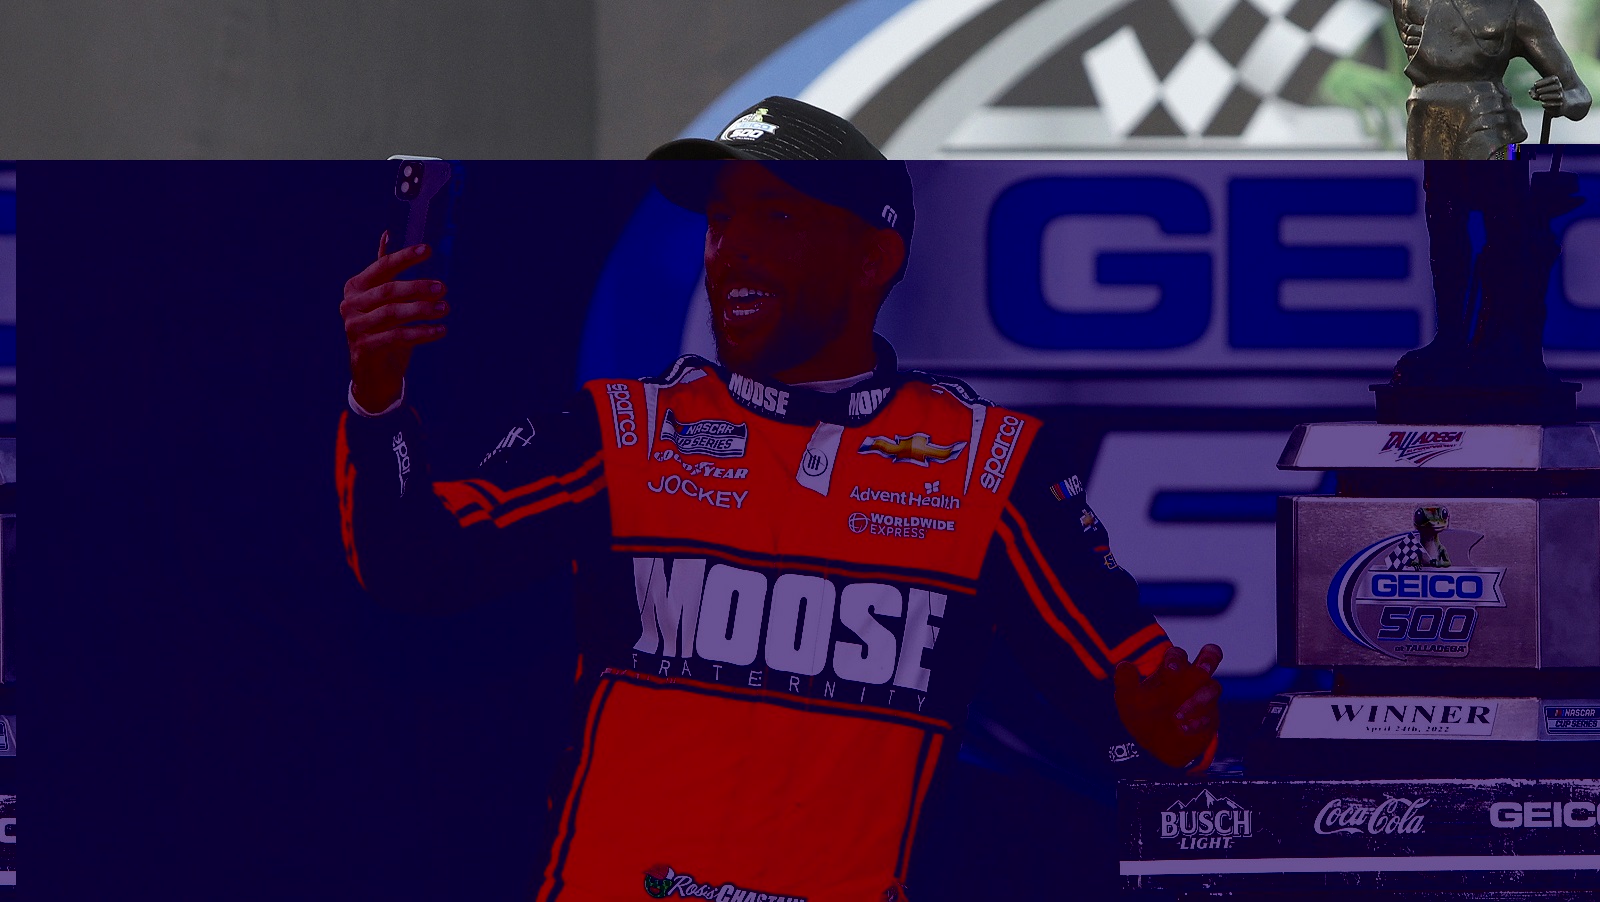 Ross Chastain, driver of the No. 1 Chevrolet, takes a selfie on Victory Lane after winning the NASCAR Cup Series GEICO 500 at Talladega Superspeedway on April 24, 2022.